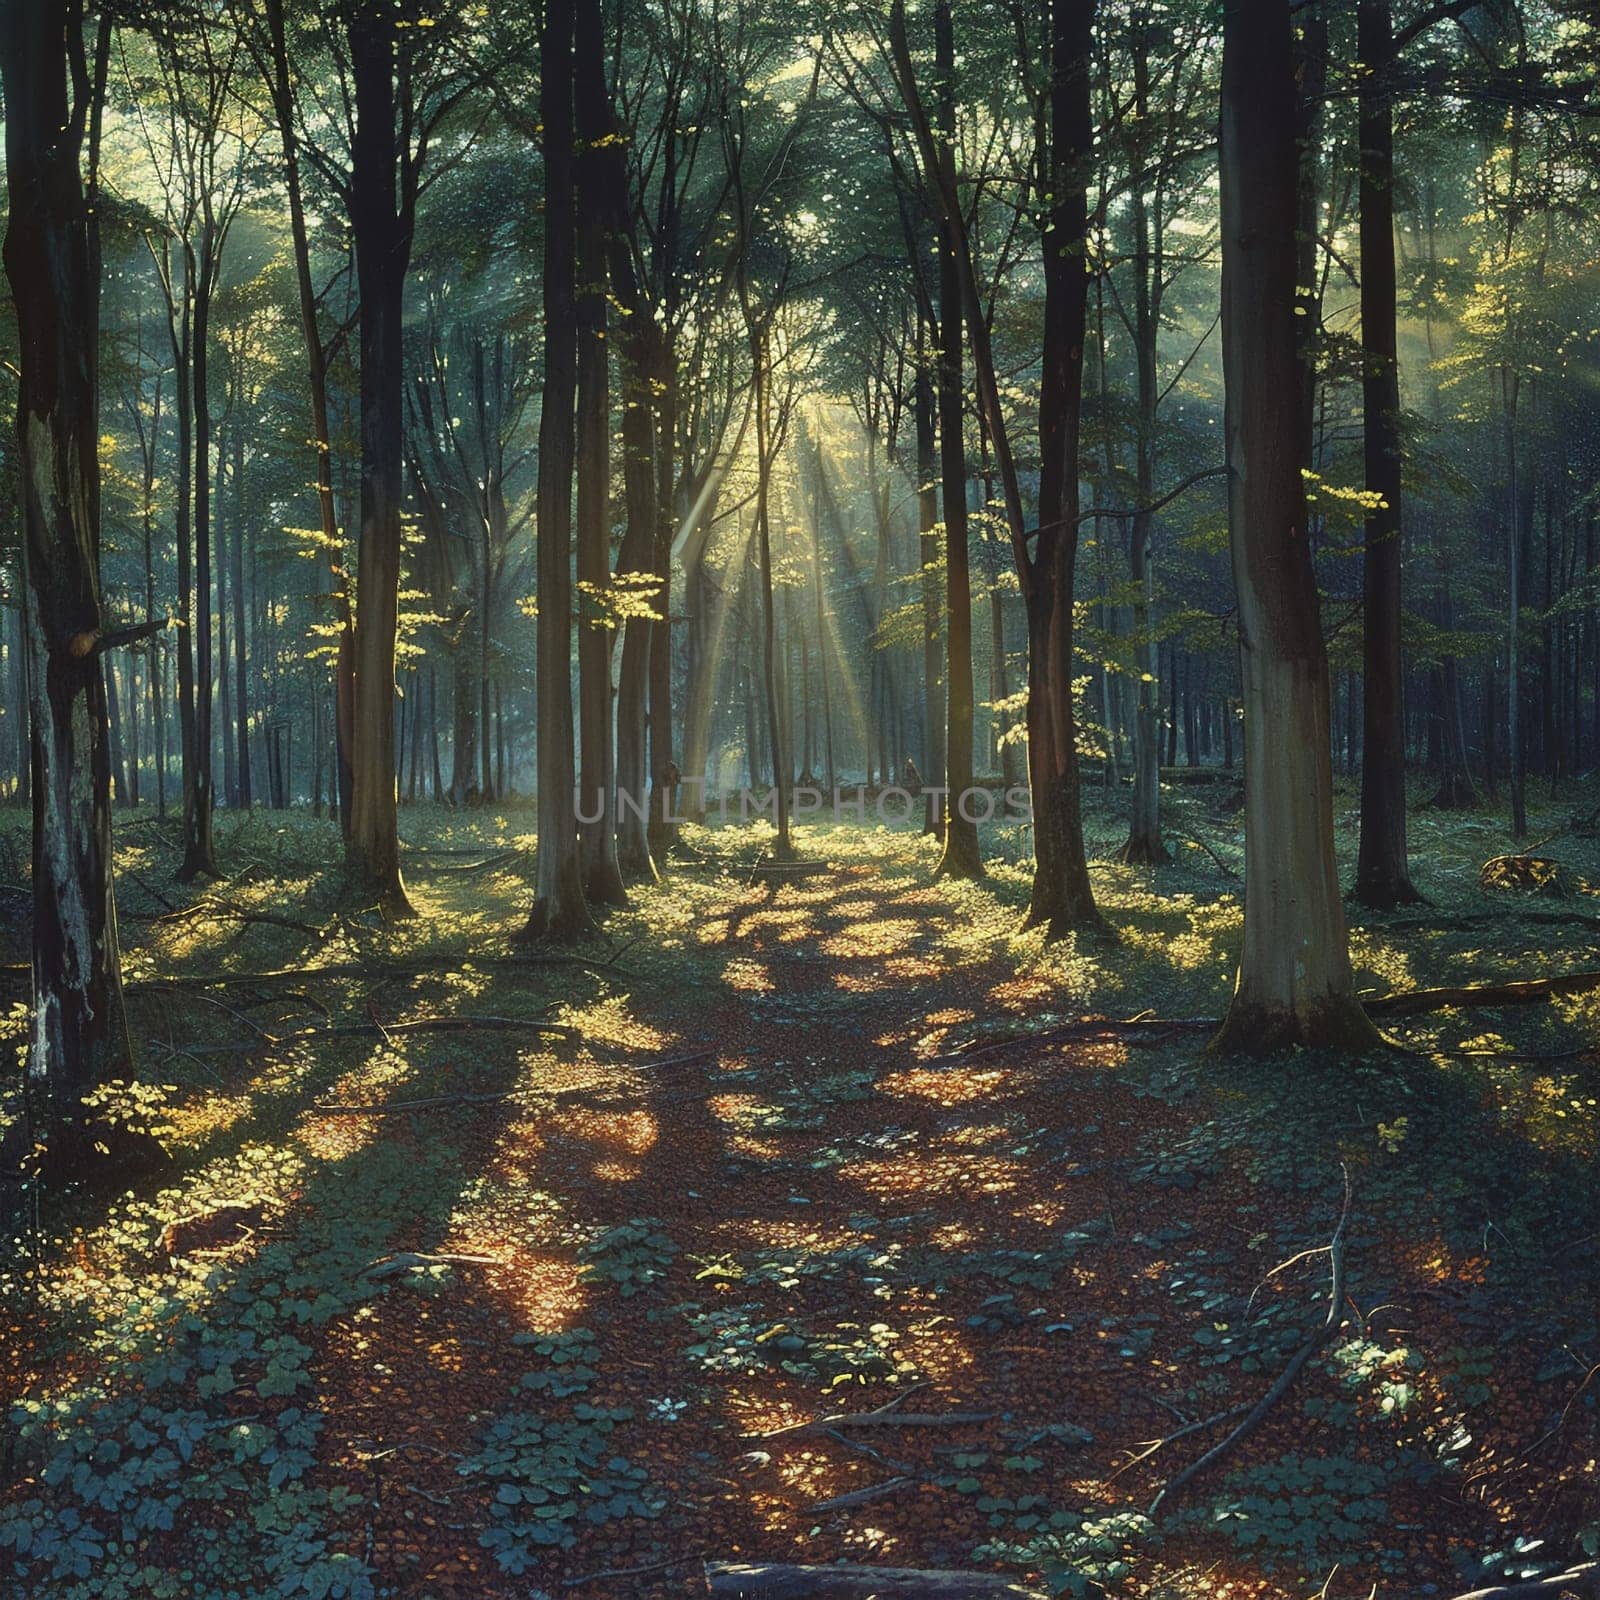 Shadows cast by a forest canopy on a woodland floor, creating a natural mosaic of light and dark.